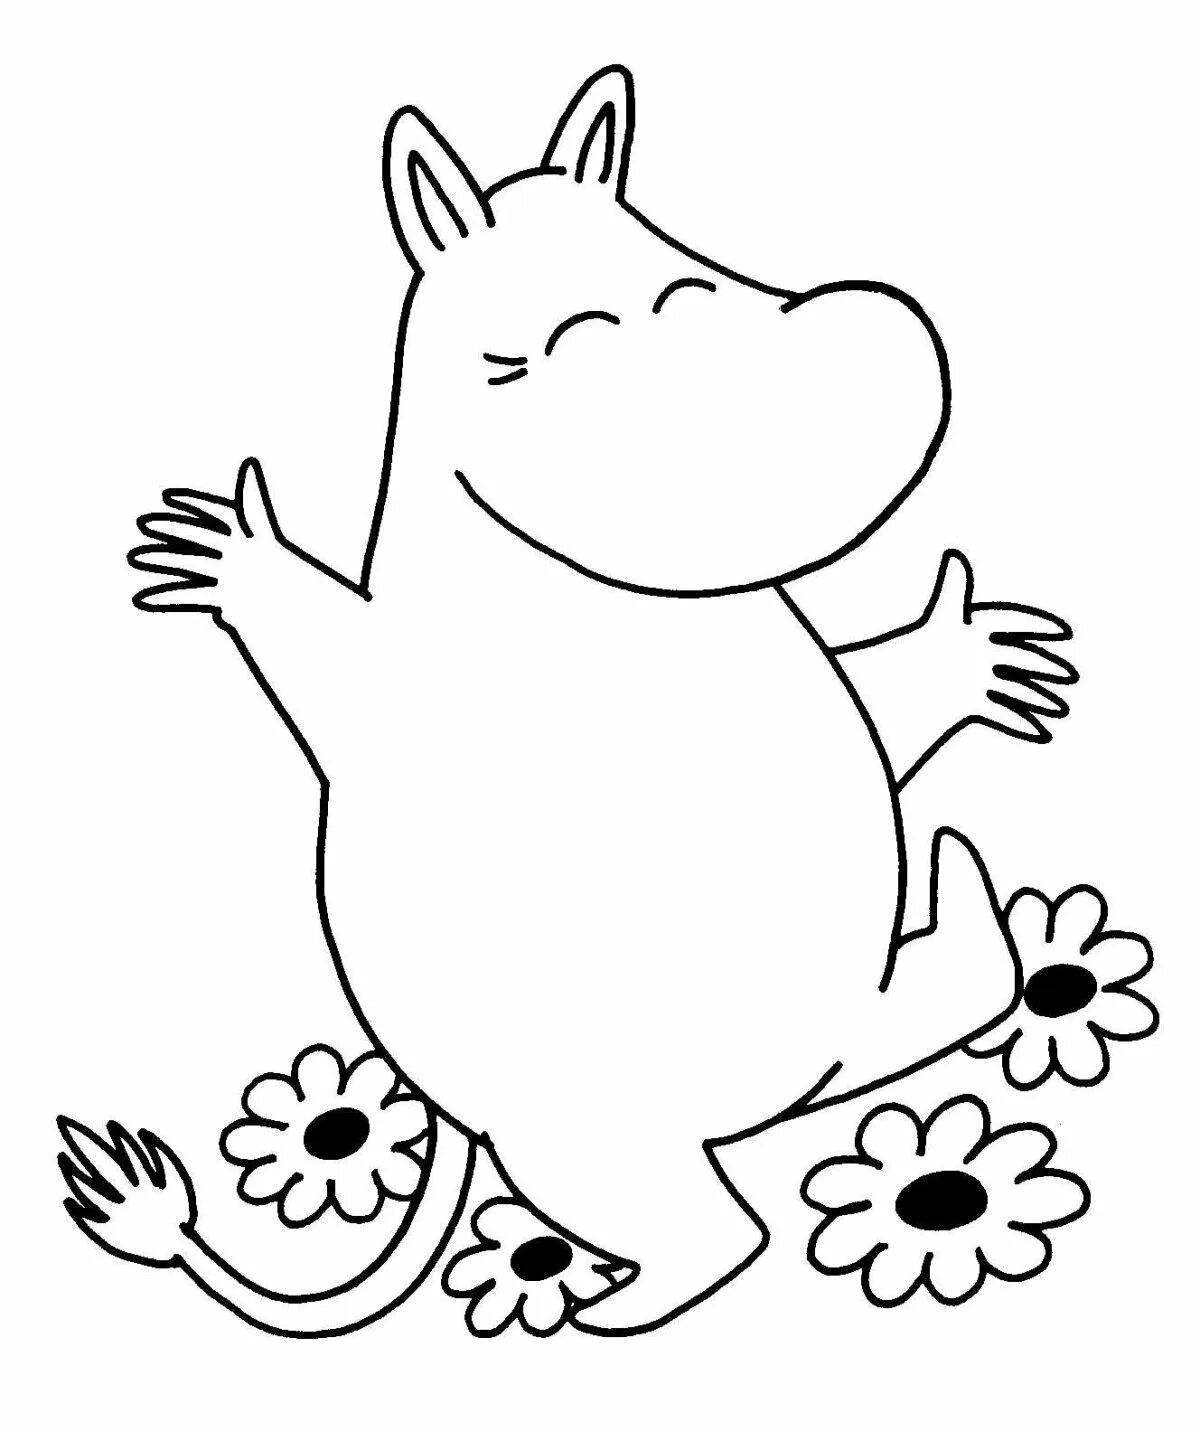 Exciting Moomintroll coloring book